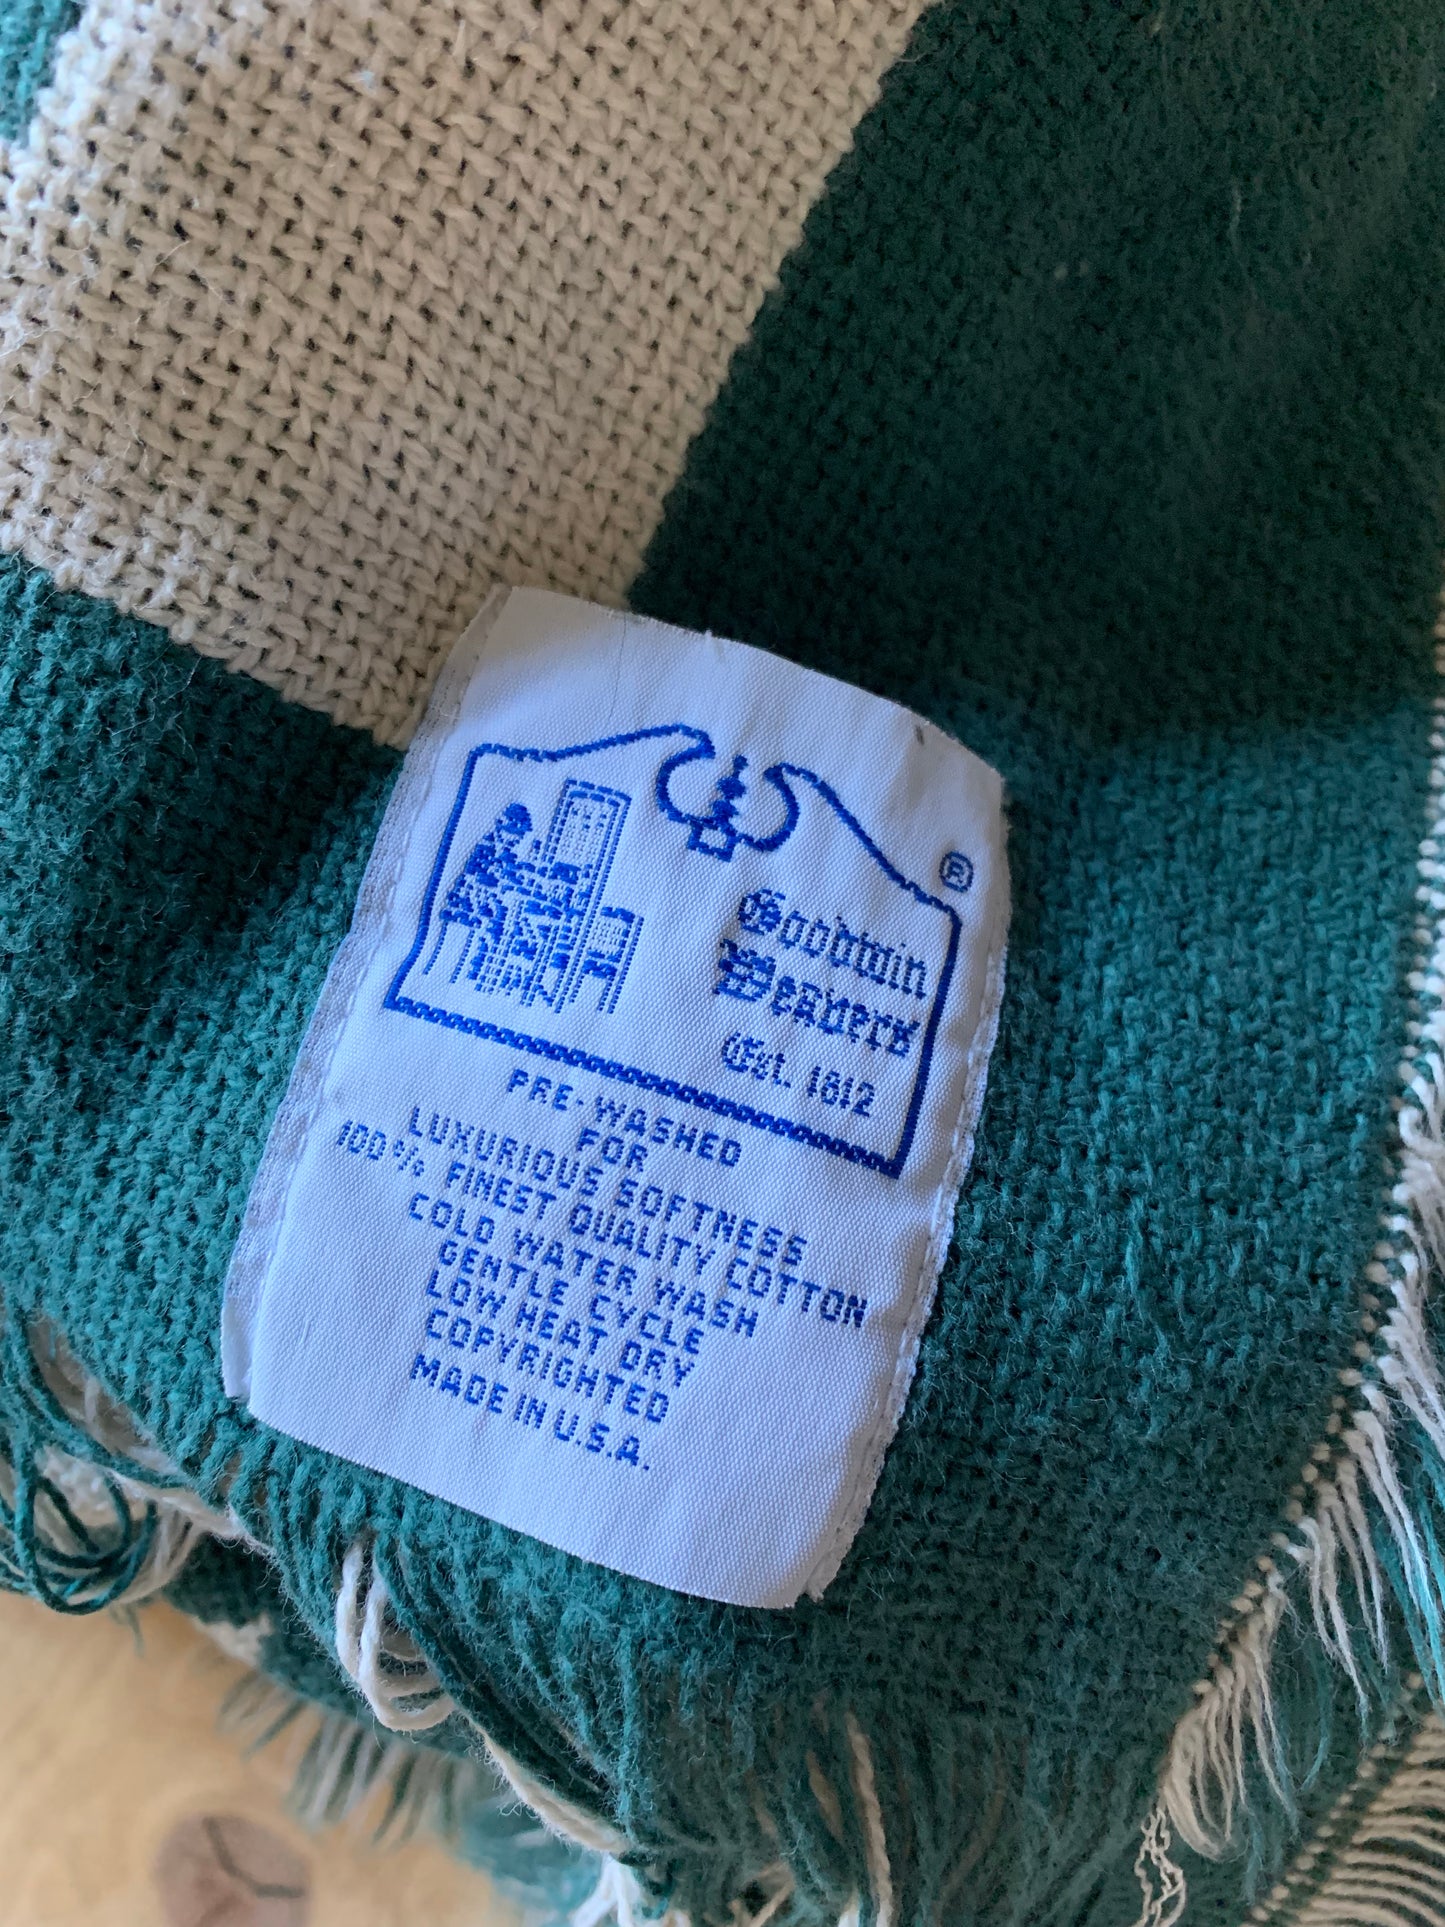 Vintage green and white throw blanket